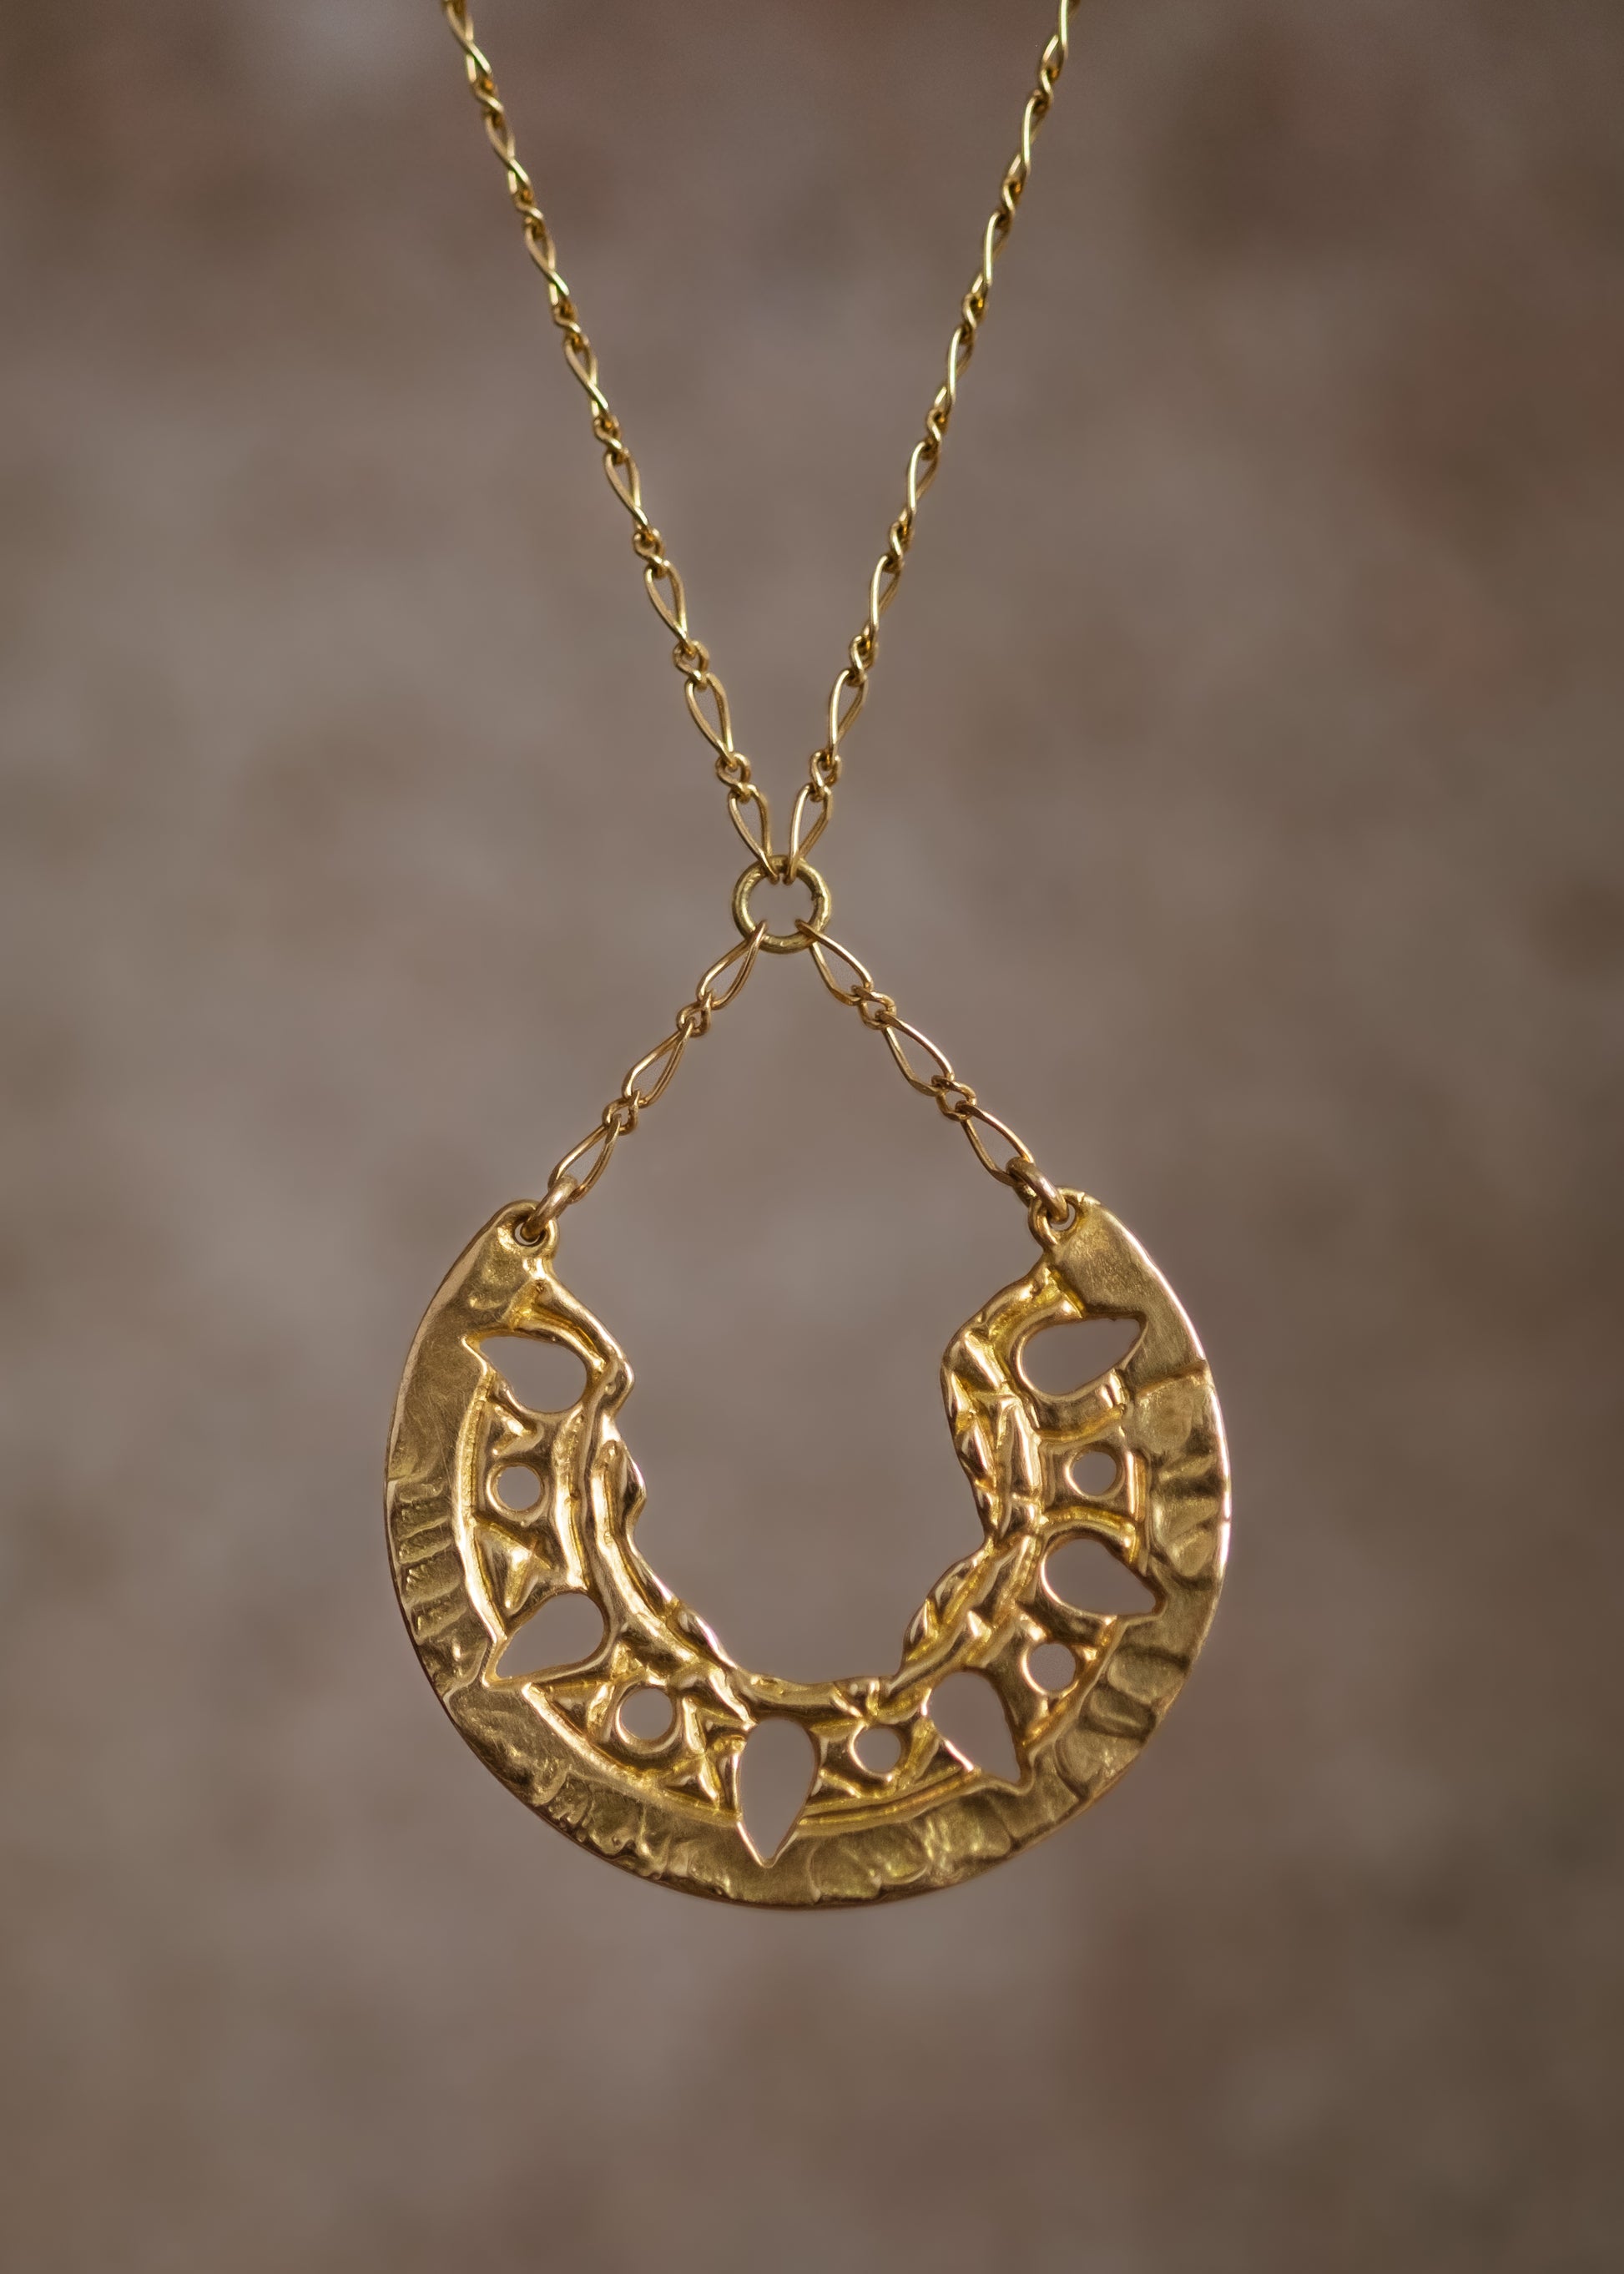 Sun-scorched sand. Glyphs that whisper centuries-old spells. Calling to mind the revered wesekh collars of ancient Egypt, the Demi necklace gleams in a crescent of textured gold. Punctuated with an arresting open-work pattern done by hand, this is a piece that harnesses the mysteries of a world shielded from time. 